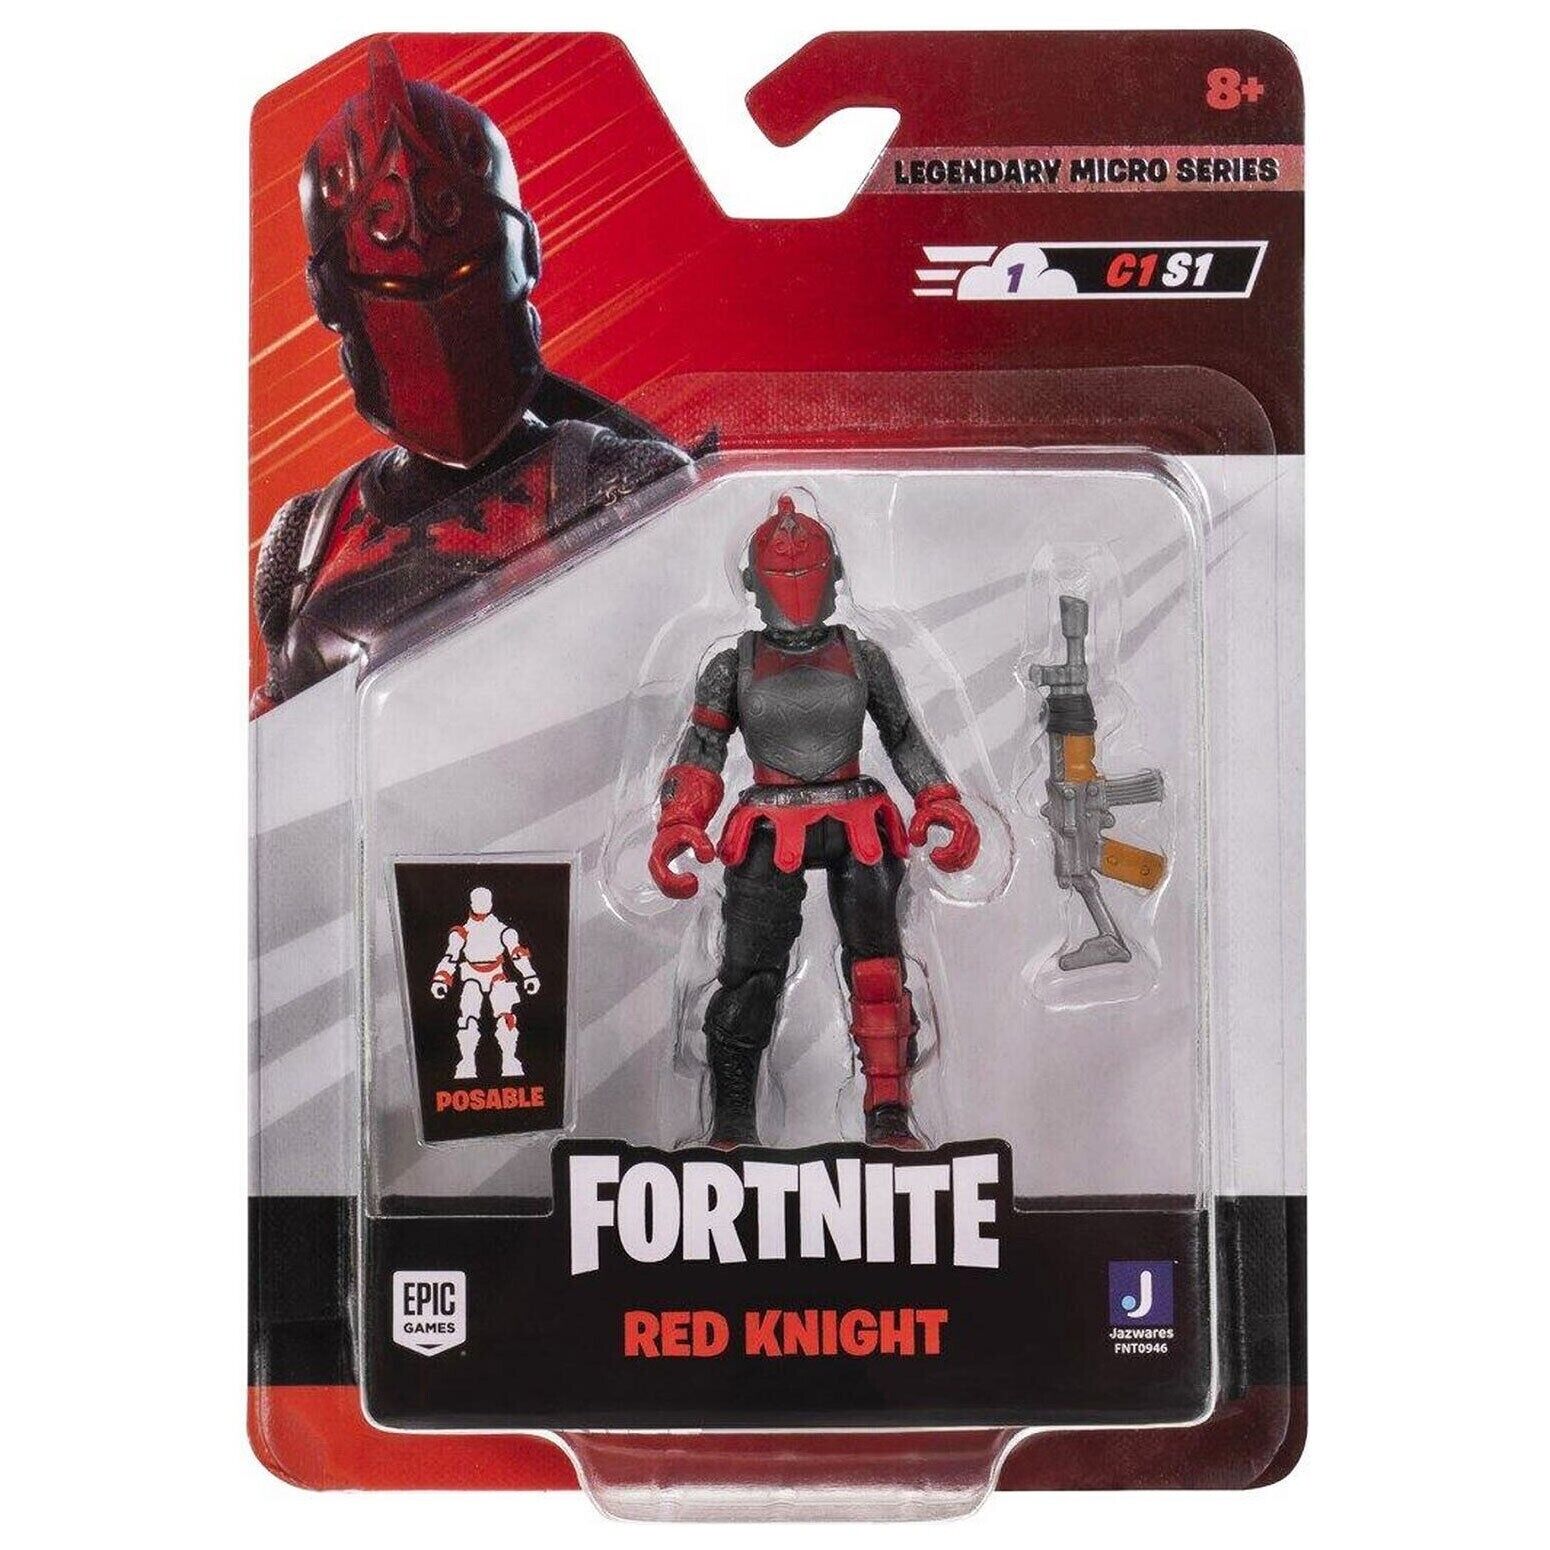 Fortnite Red Knight Legendary Micro Series 2.5" Action Figure NEW